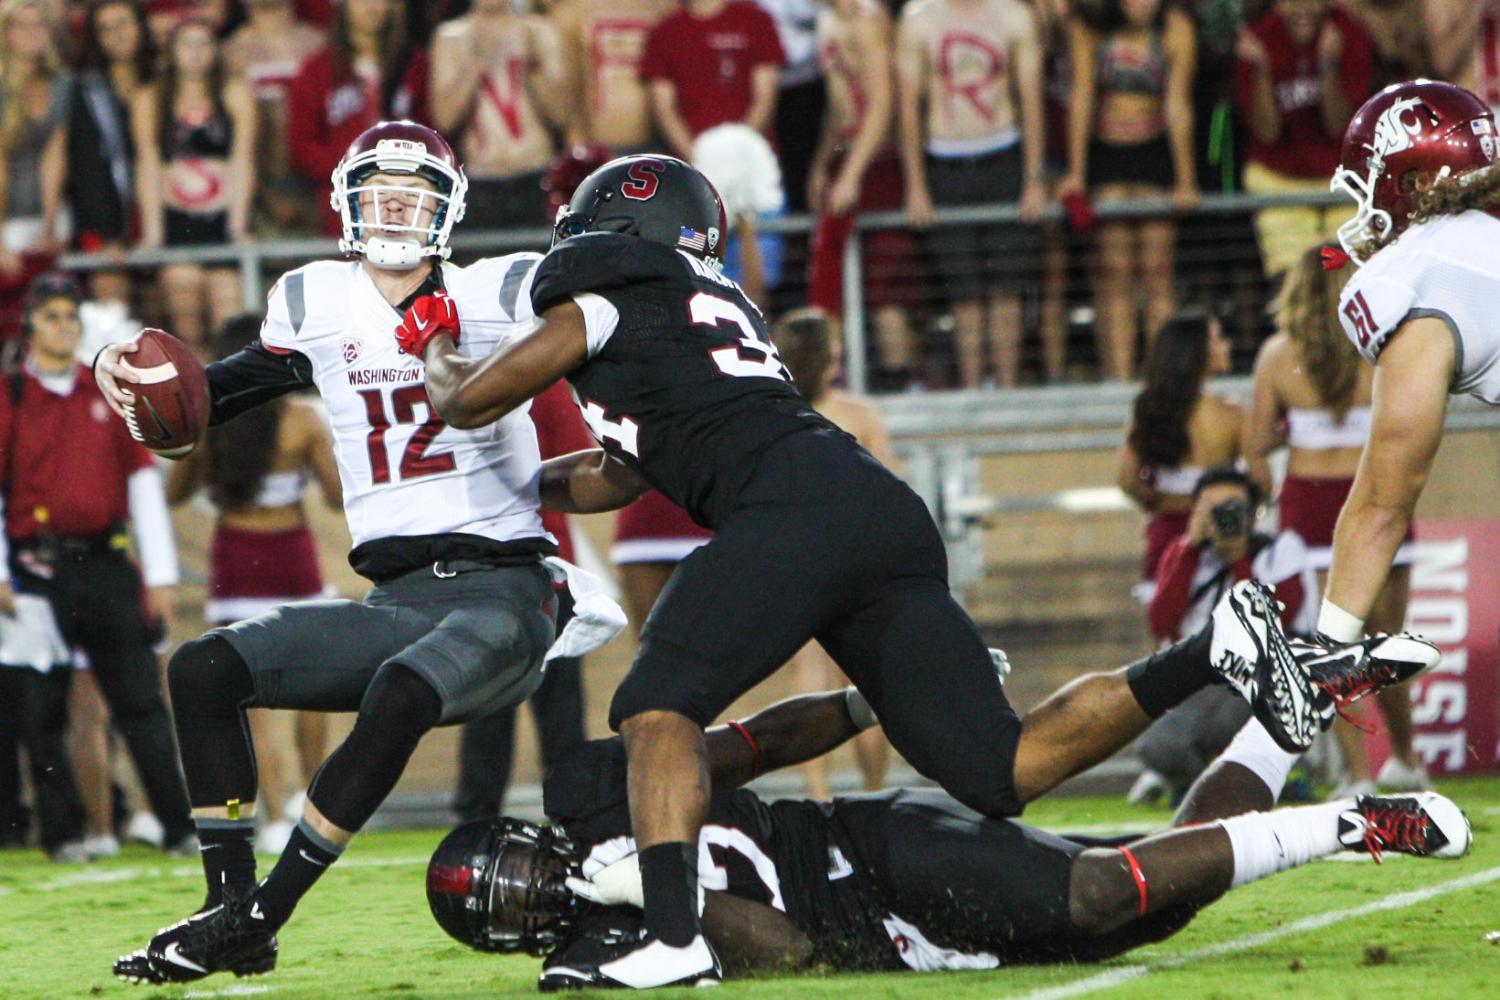 Redshirt+senior+quarterback+Connor+Haliday+is+sacked+by+Stanford+defenders%2C+Oct.+10%2C+2014.%C2%A0